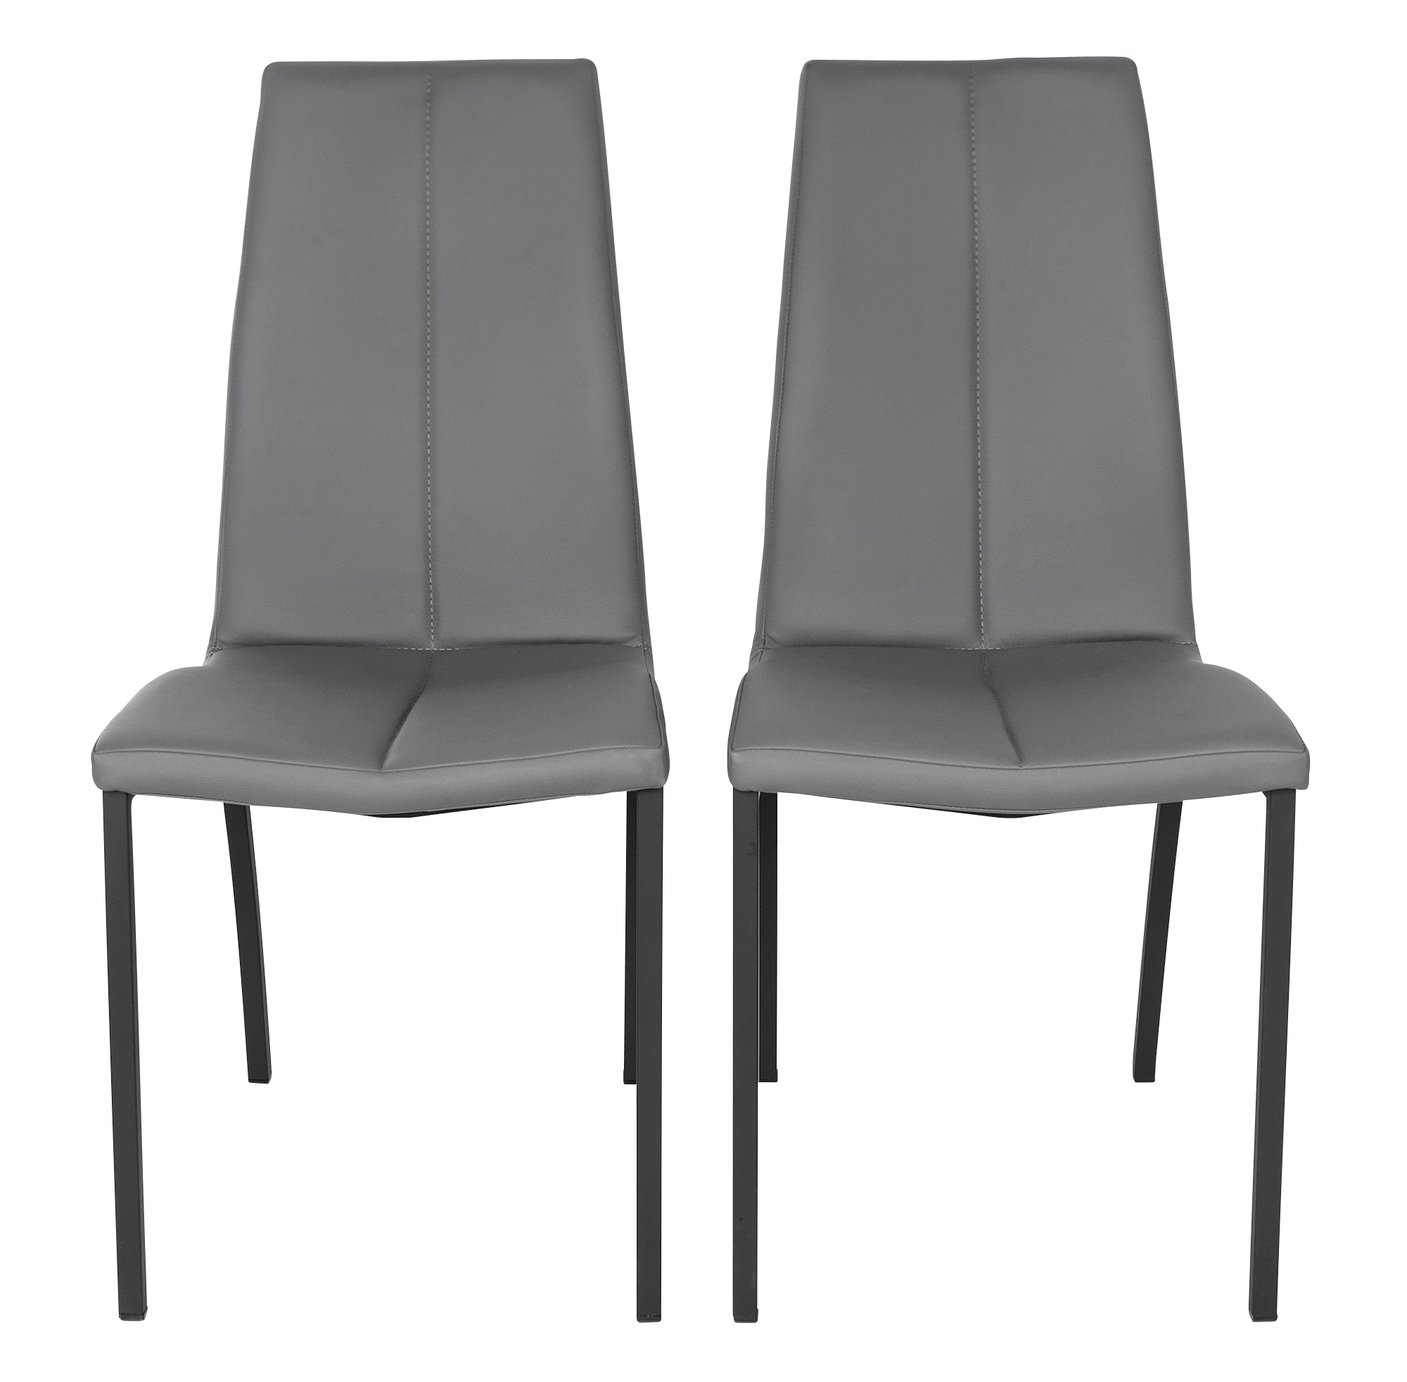 Argos Home Milo Pair of Curved Leather Effect Chairs review